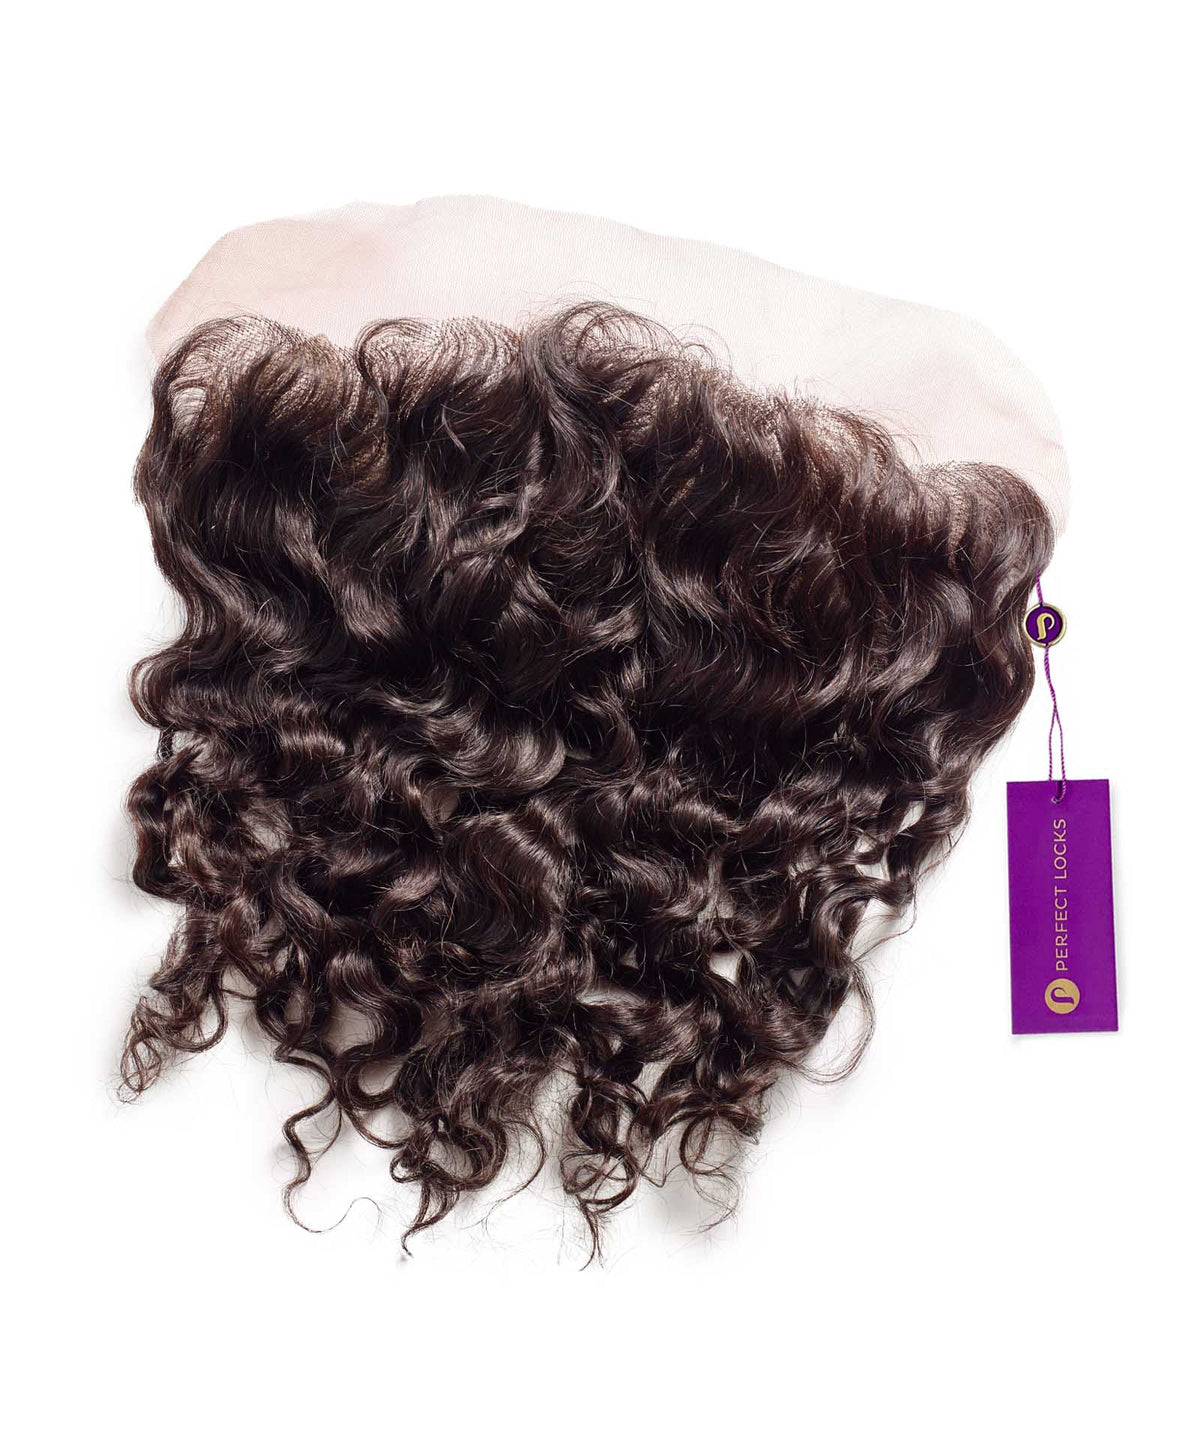 Curly Lace Frontals